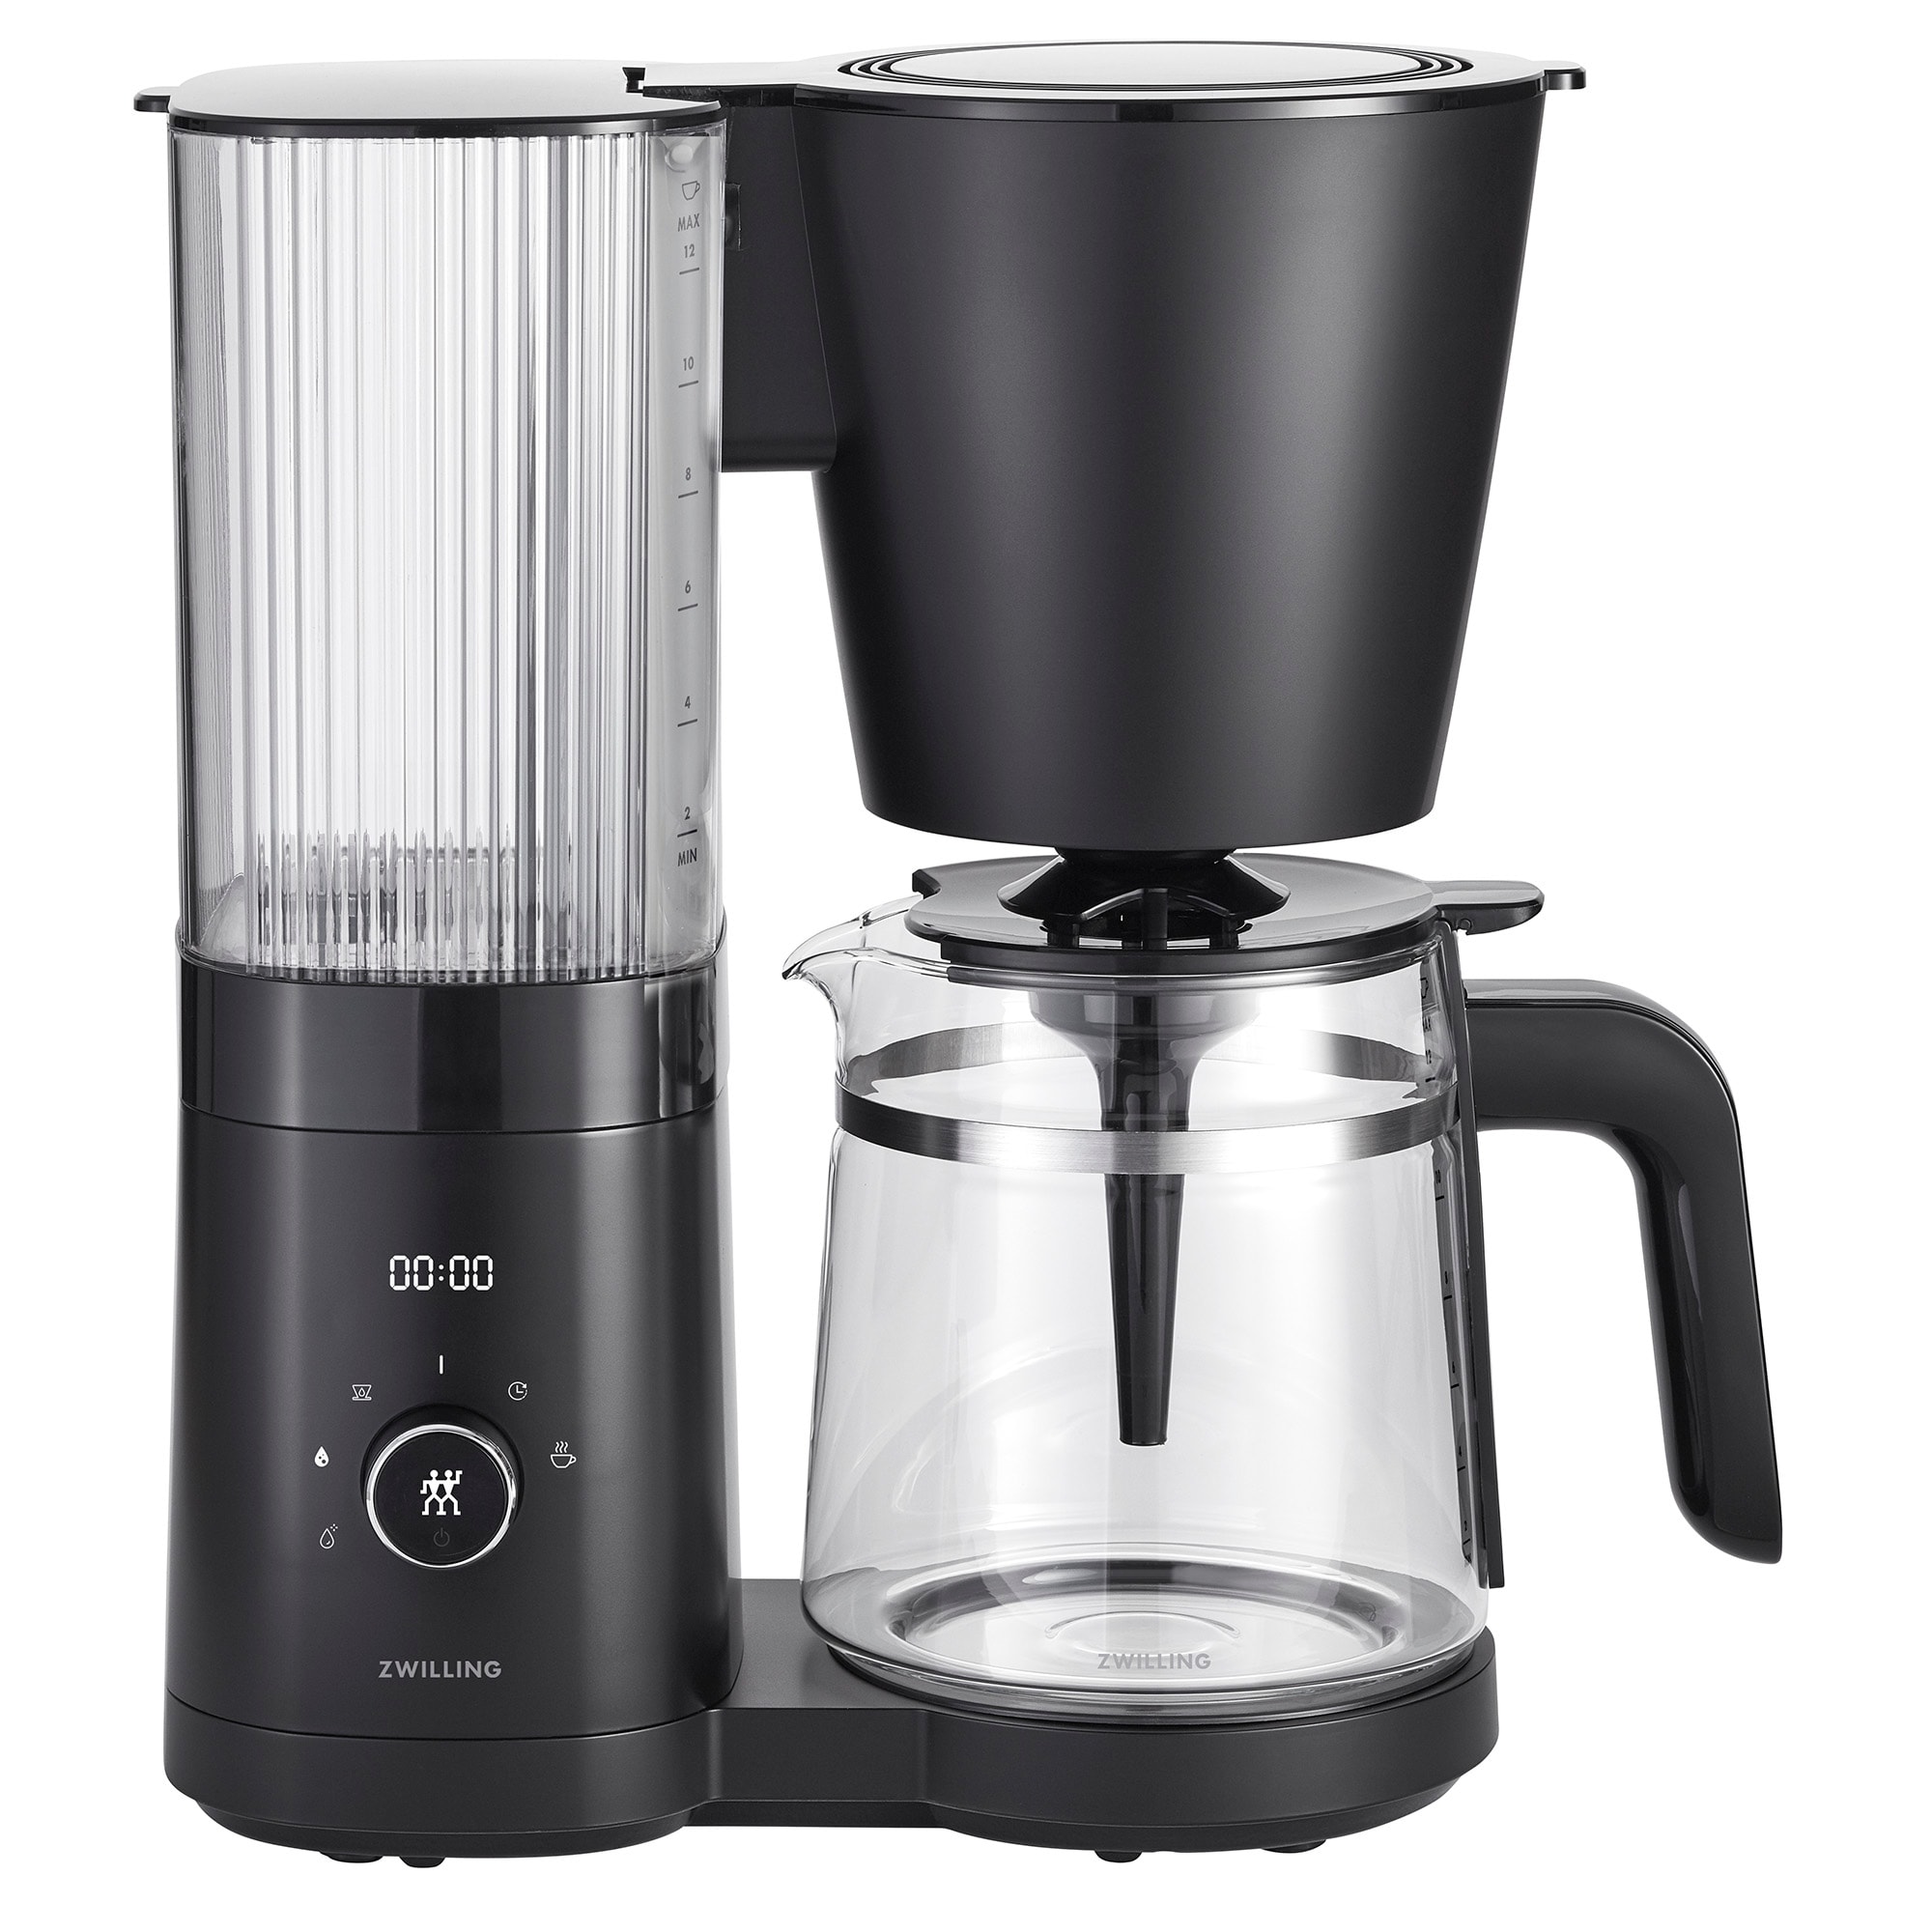 https://ak1.ostkcdn.com/images/products/is/images/direct/e272feaf9a6d7028ca3b3d6e17040e60e0ab9681/ZWILLING-Enfinigy-Glass-Drip-Coffee-Maker-12-Cup%2C-Black.jpg